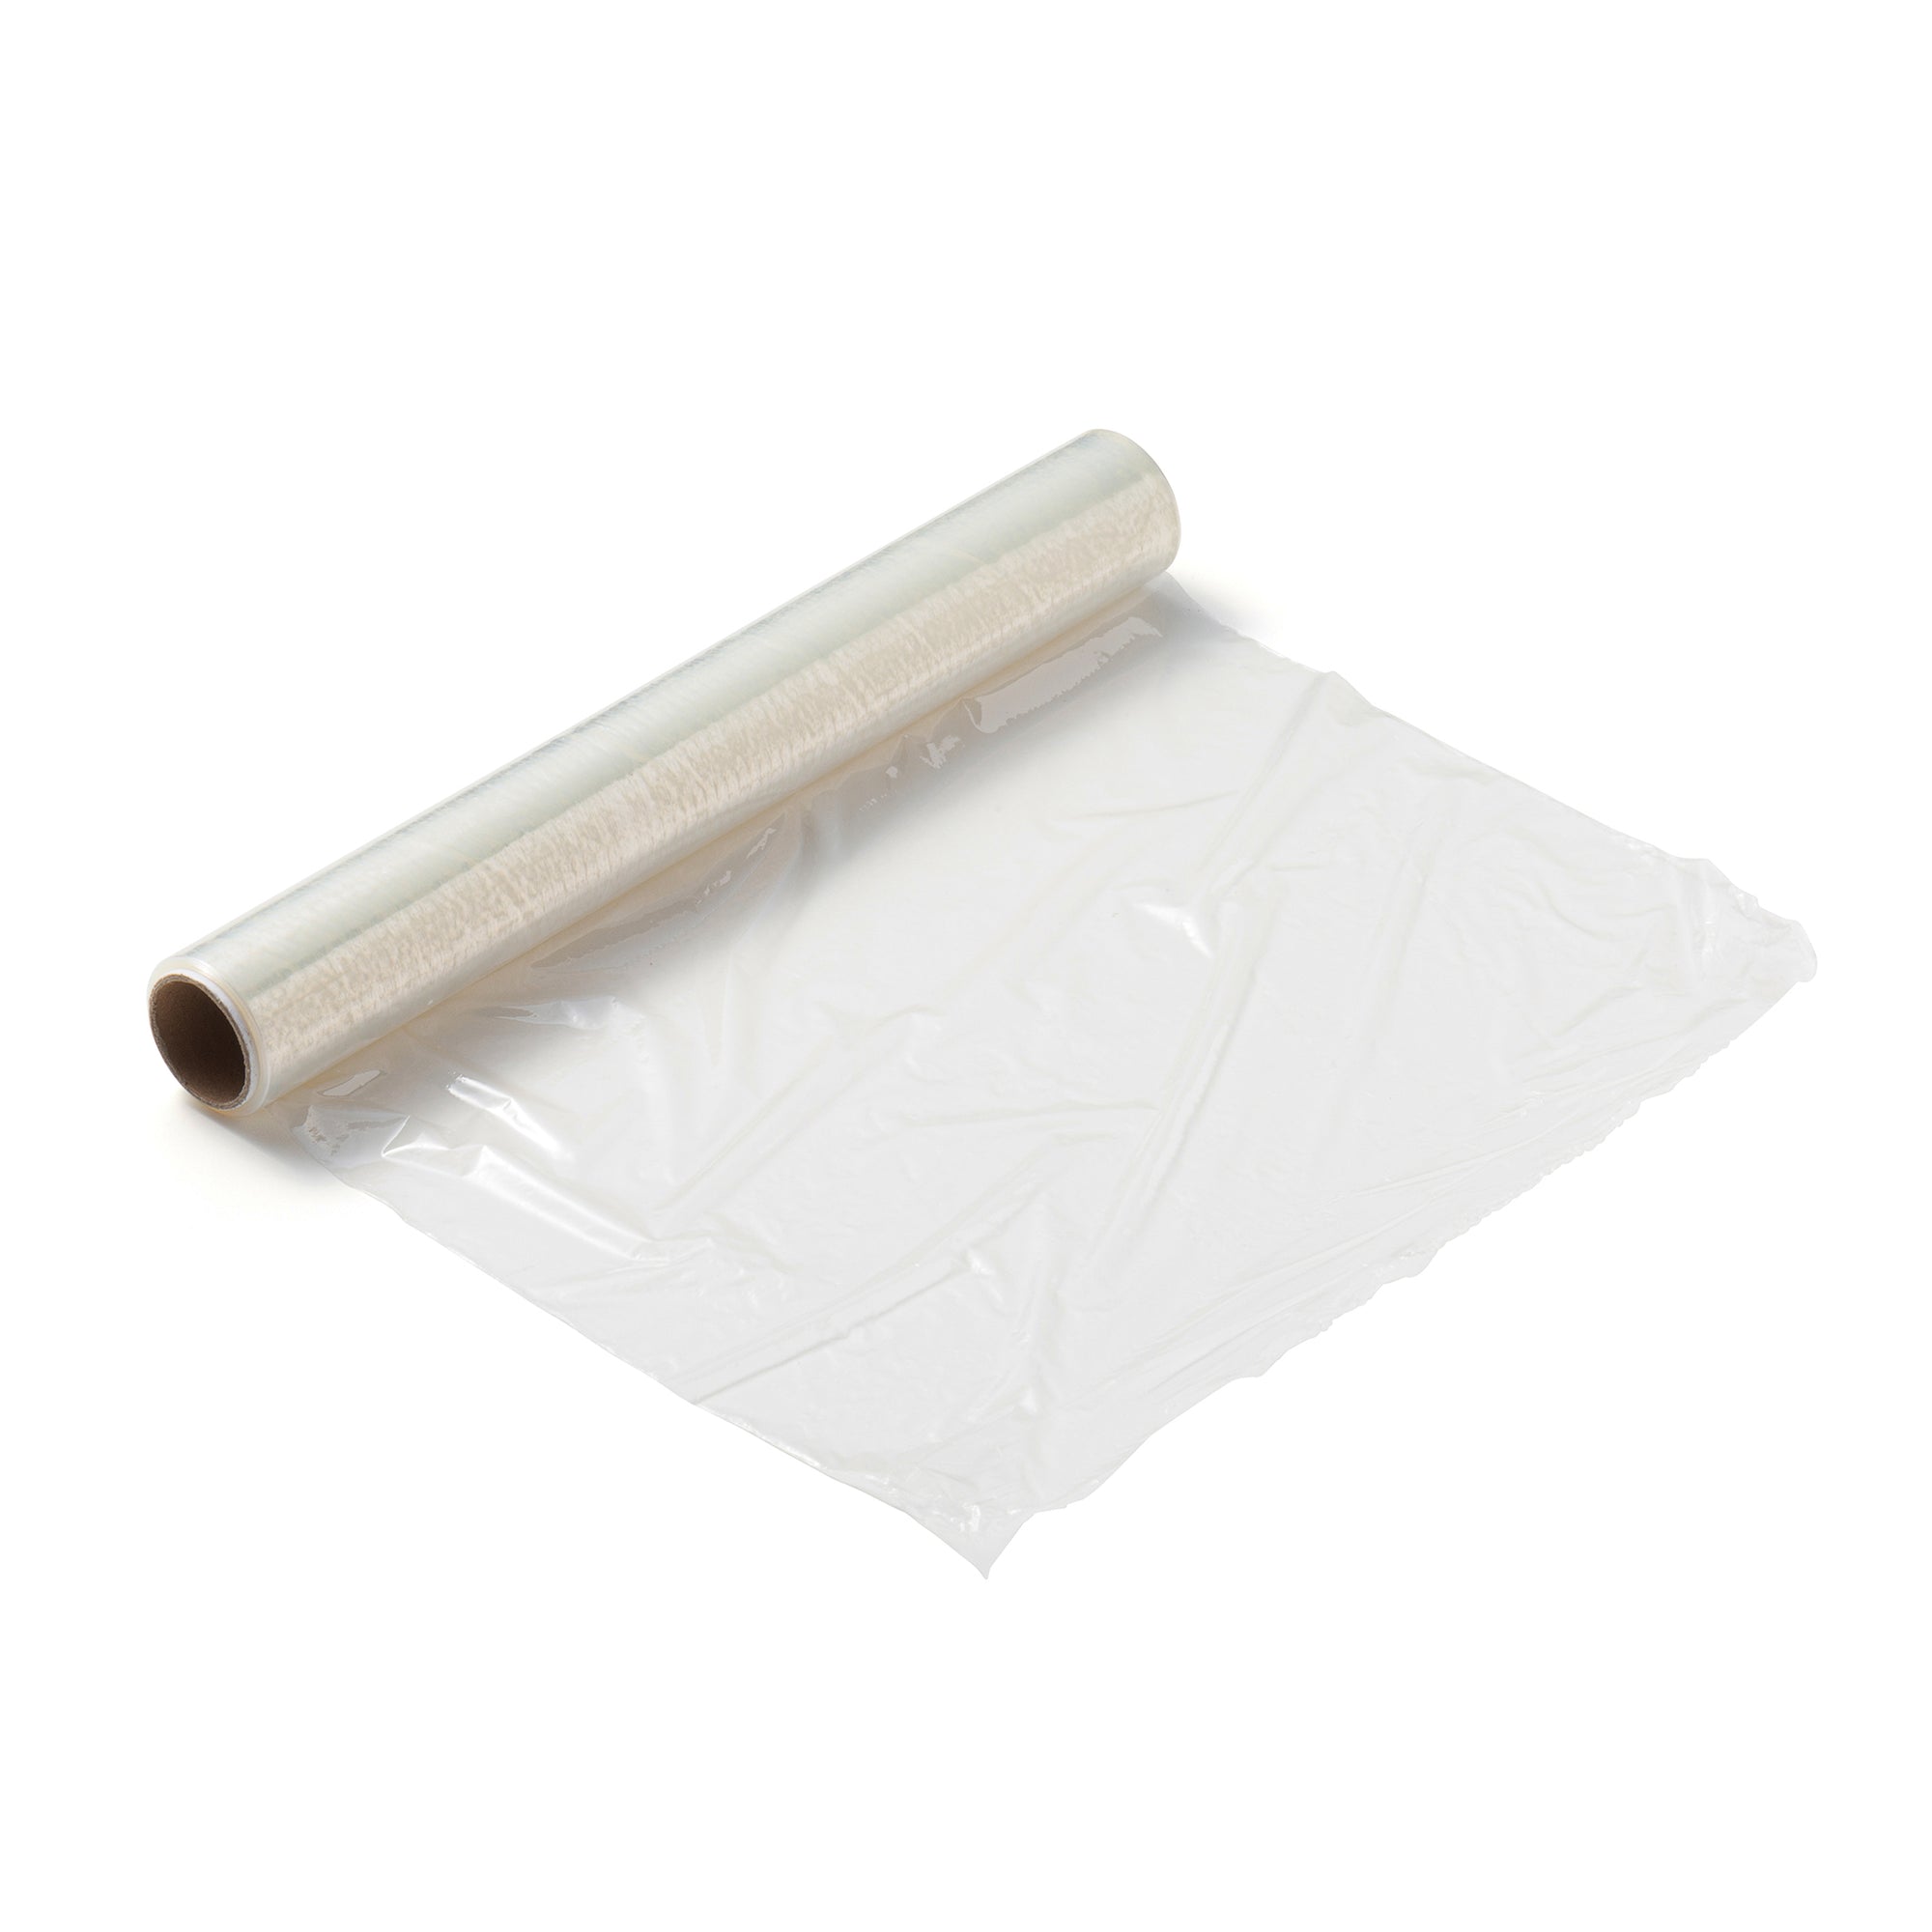 Perforated Plastic Wrap For Food and Other Applications